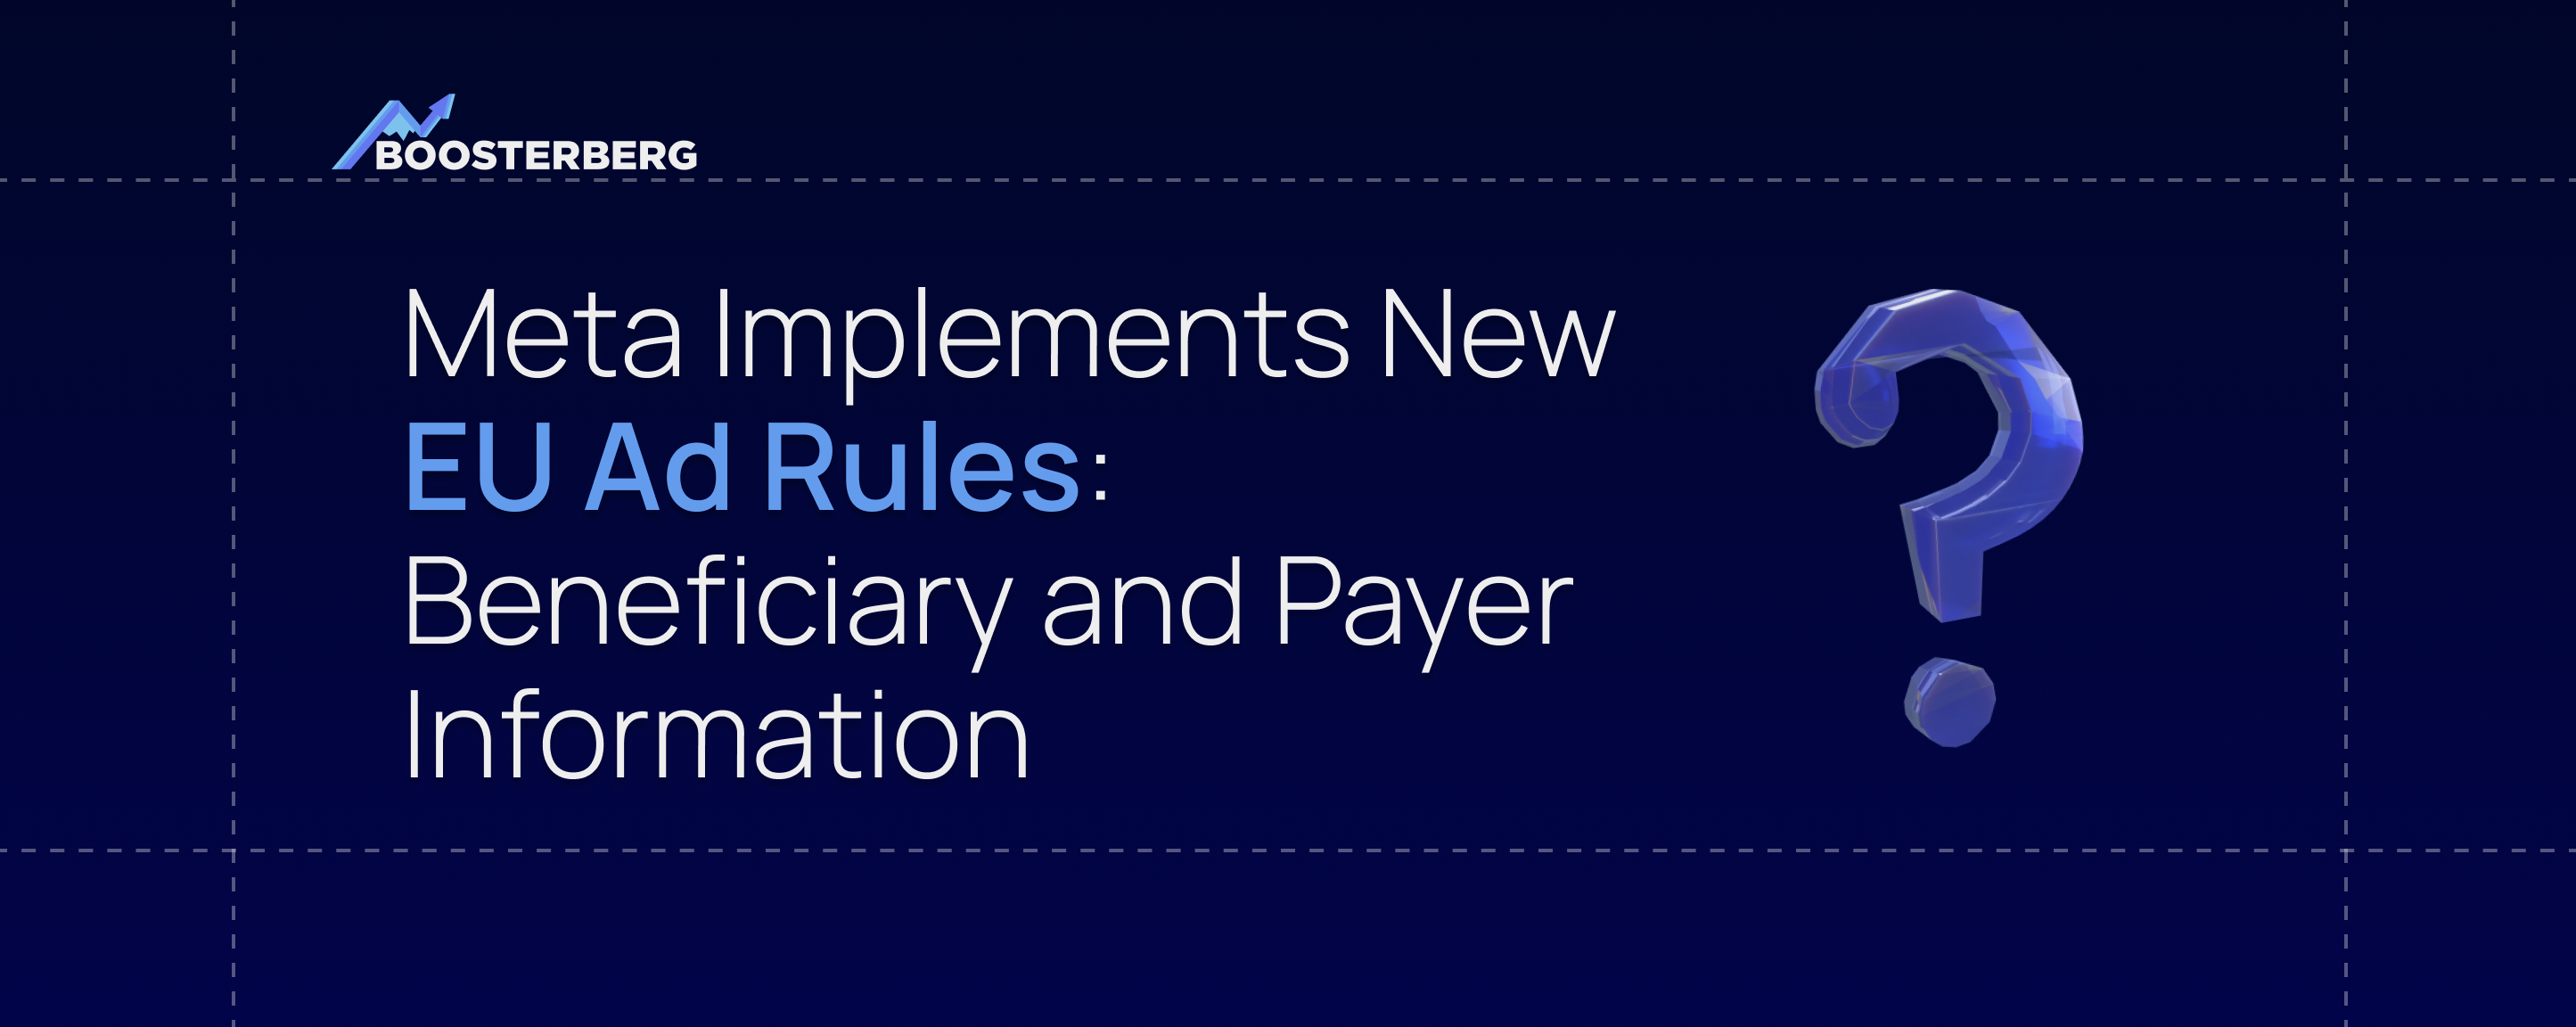 Meta Implements New EU Ad Rules: What You Need to Know about Beneficiary and Payer Information